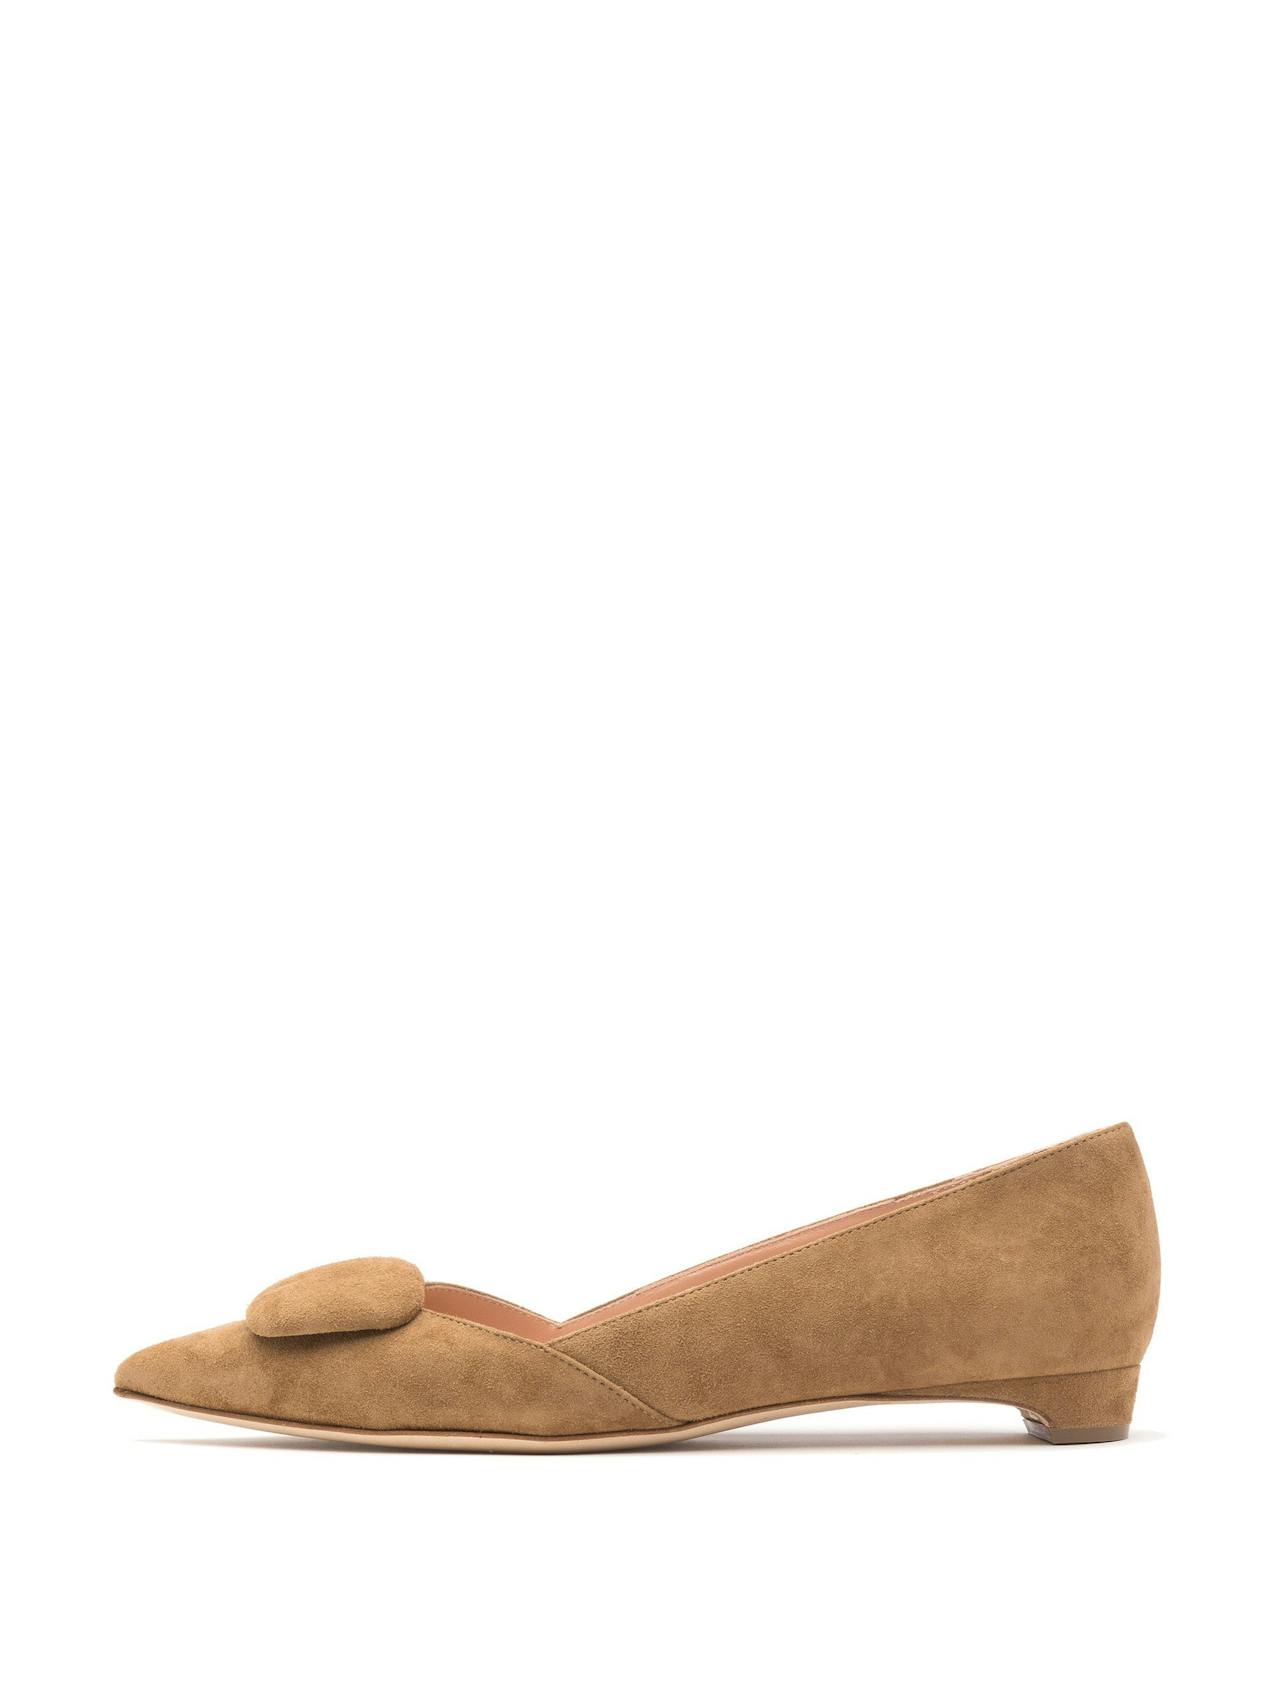 Totem suede New Aga flats